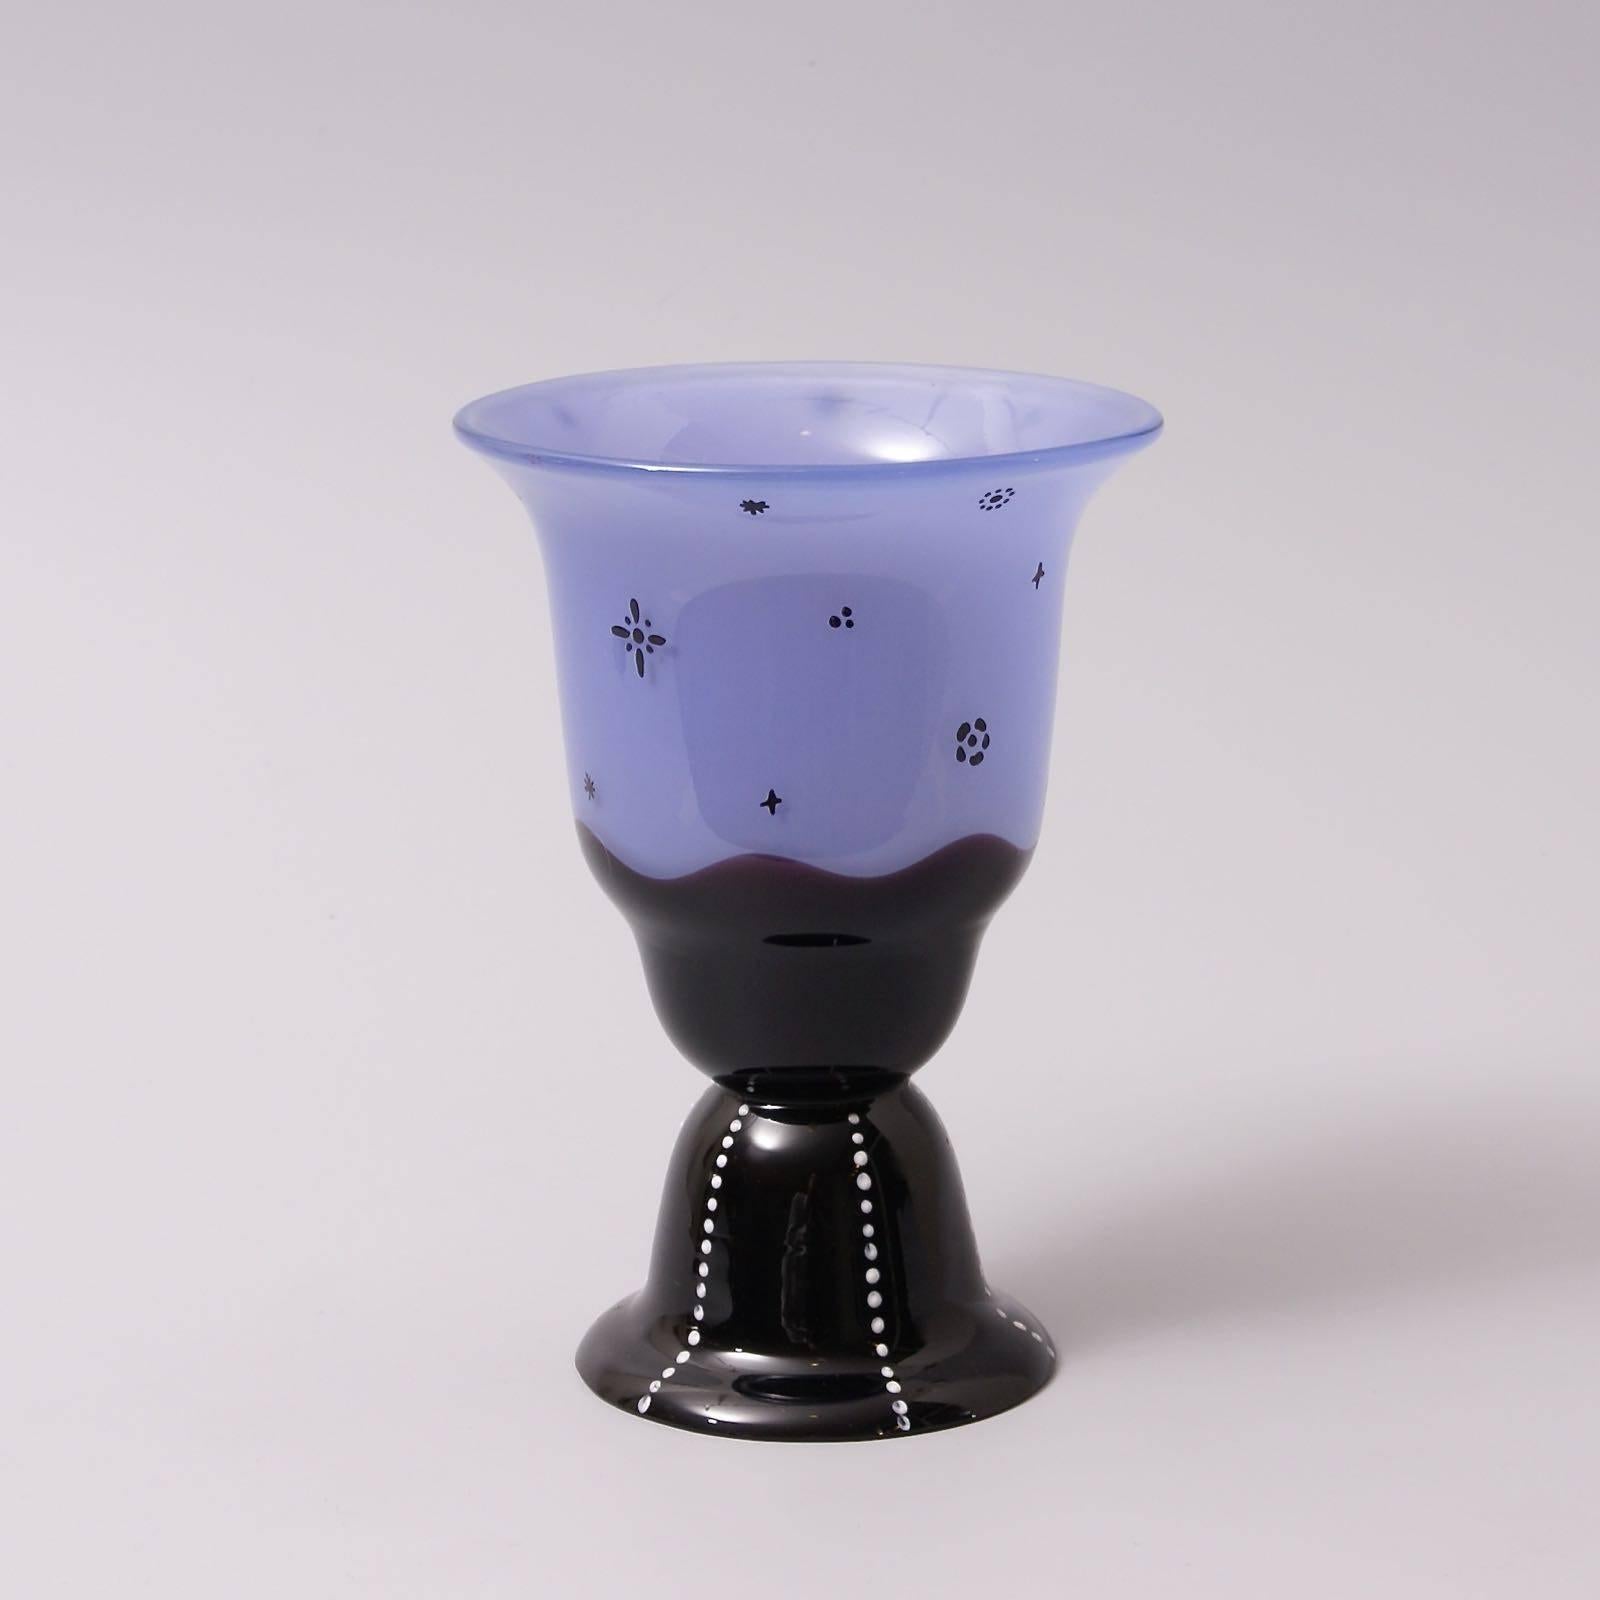 The blue glass footed vase partially covered with a black layer at the base, black enamelled decoration on the vase, white enameled dots on the foot (some white dots erased, visible om the image 3) produced by Loetz after a Dagobert Peche design.